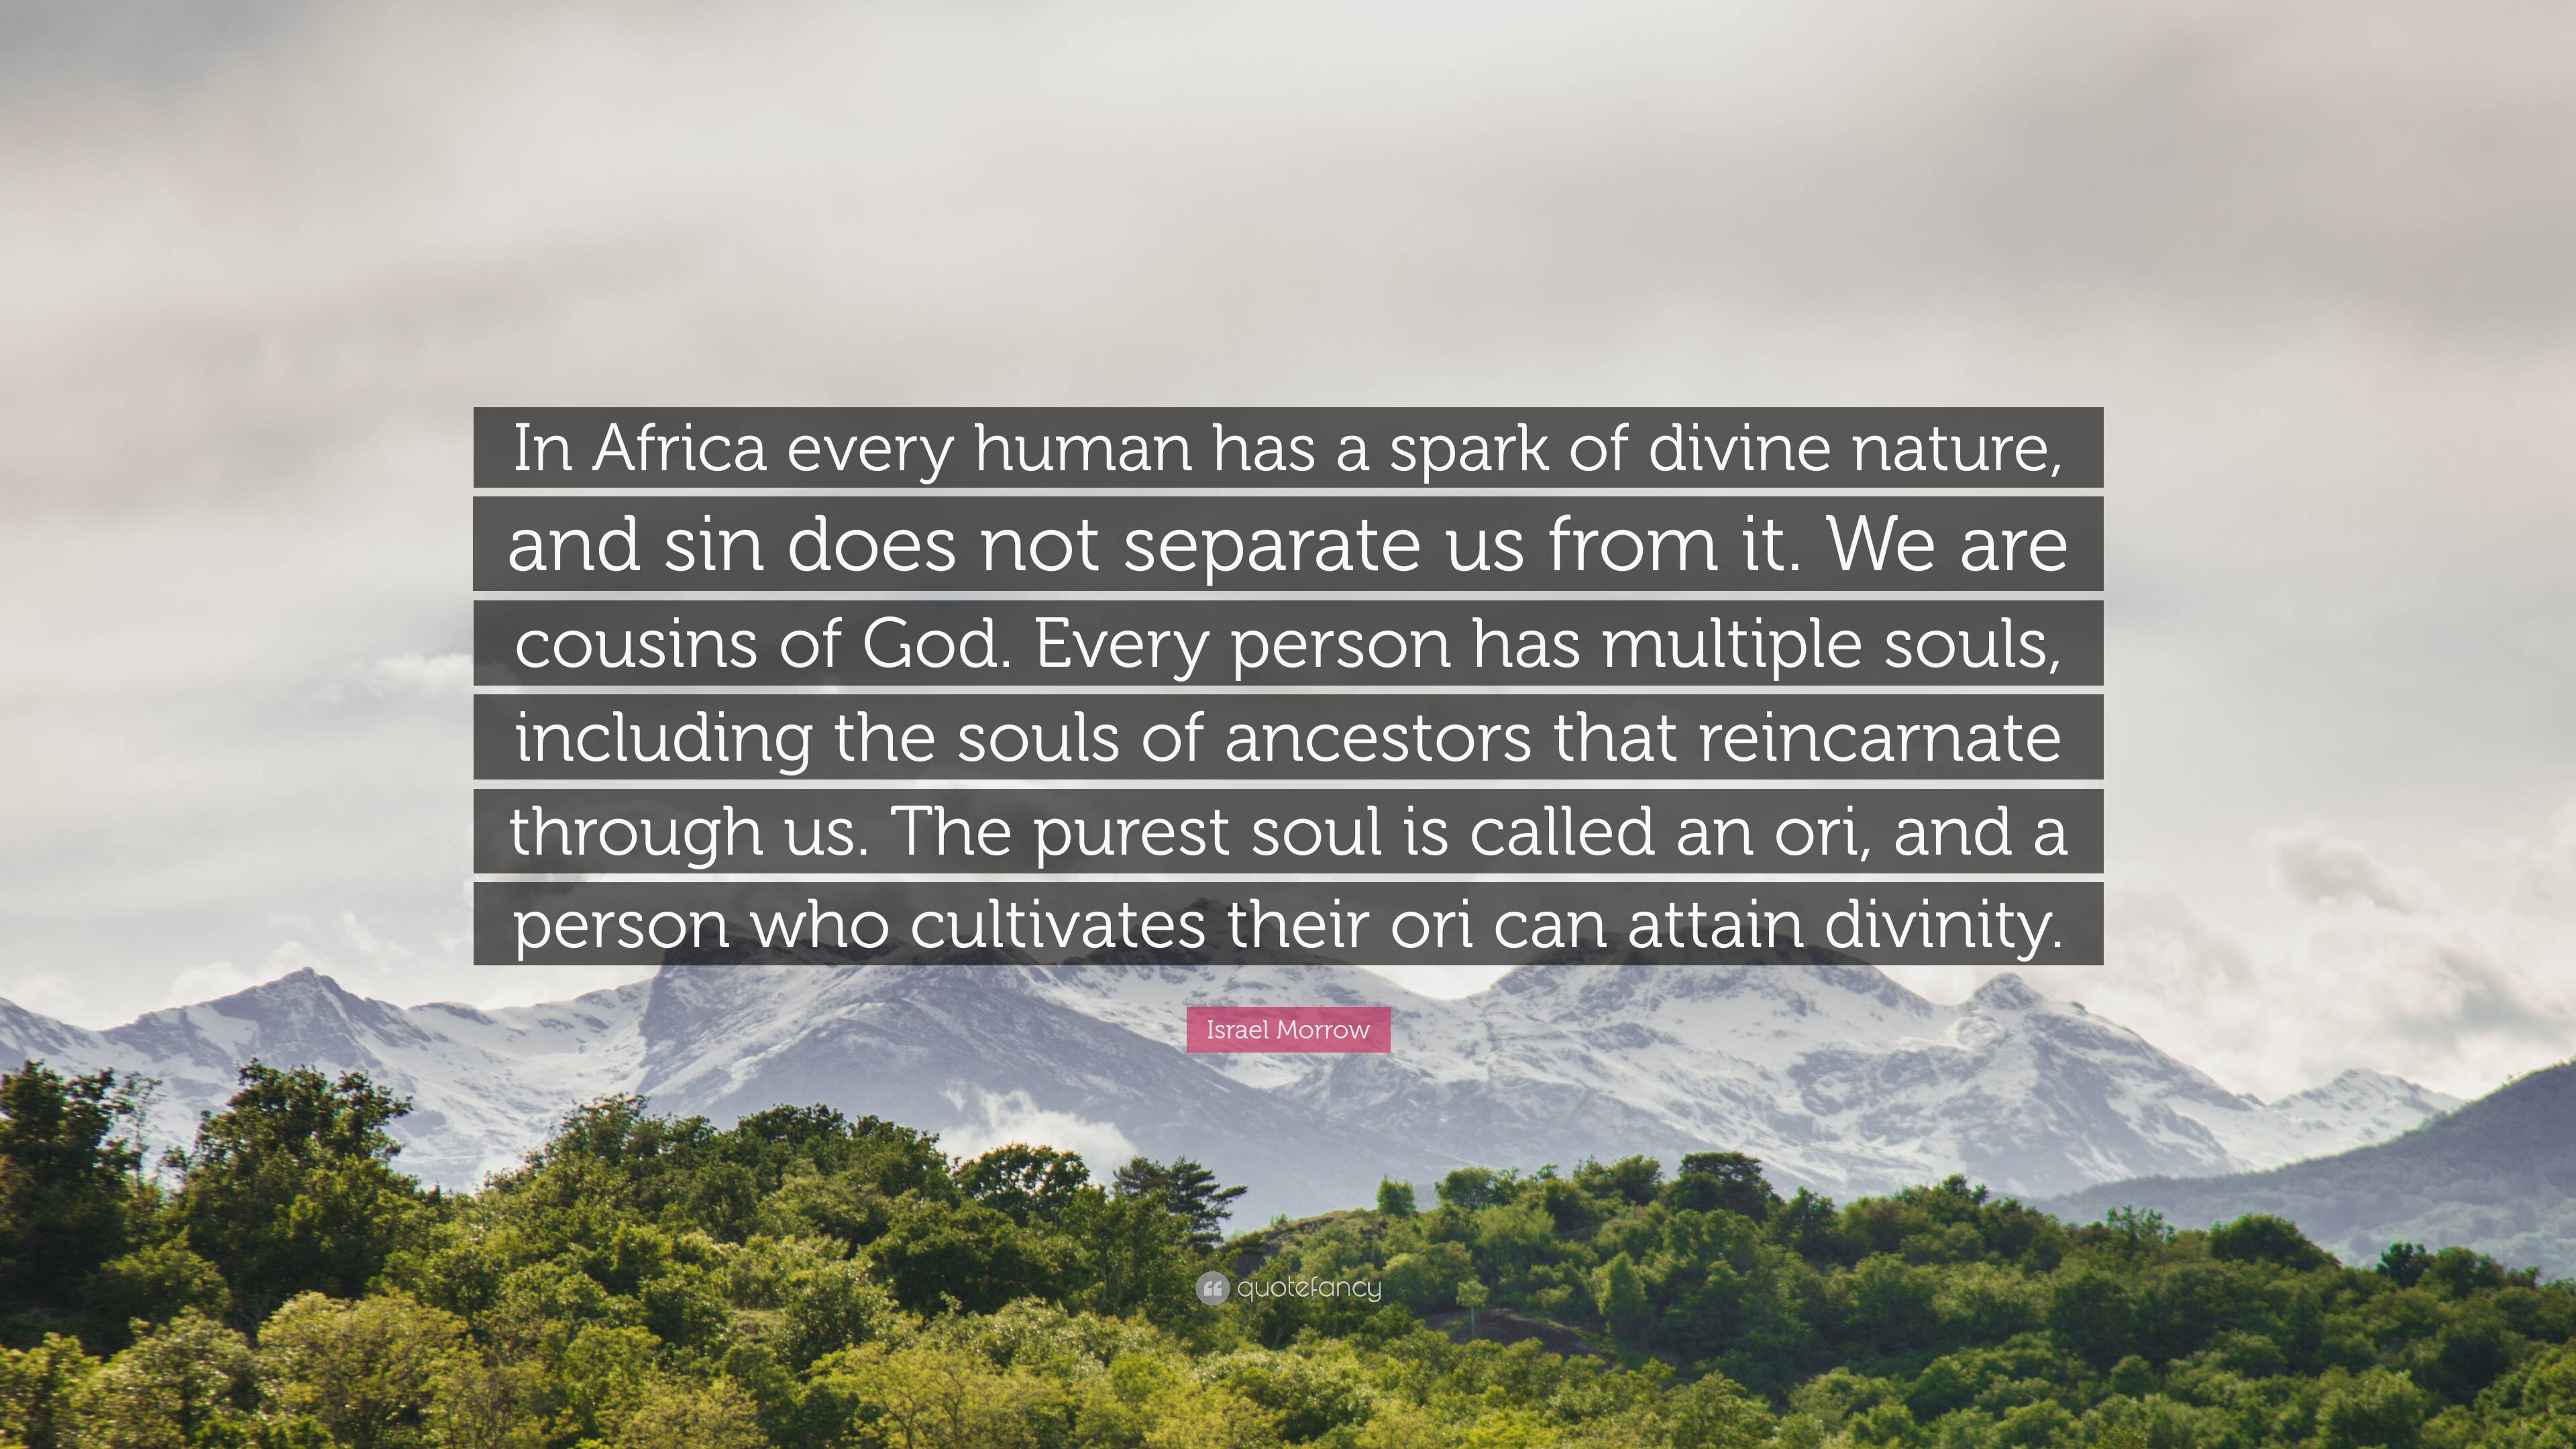 Israel Morrow Quote: “In Africa every human has a spark of divine nature